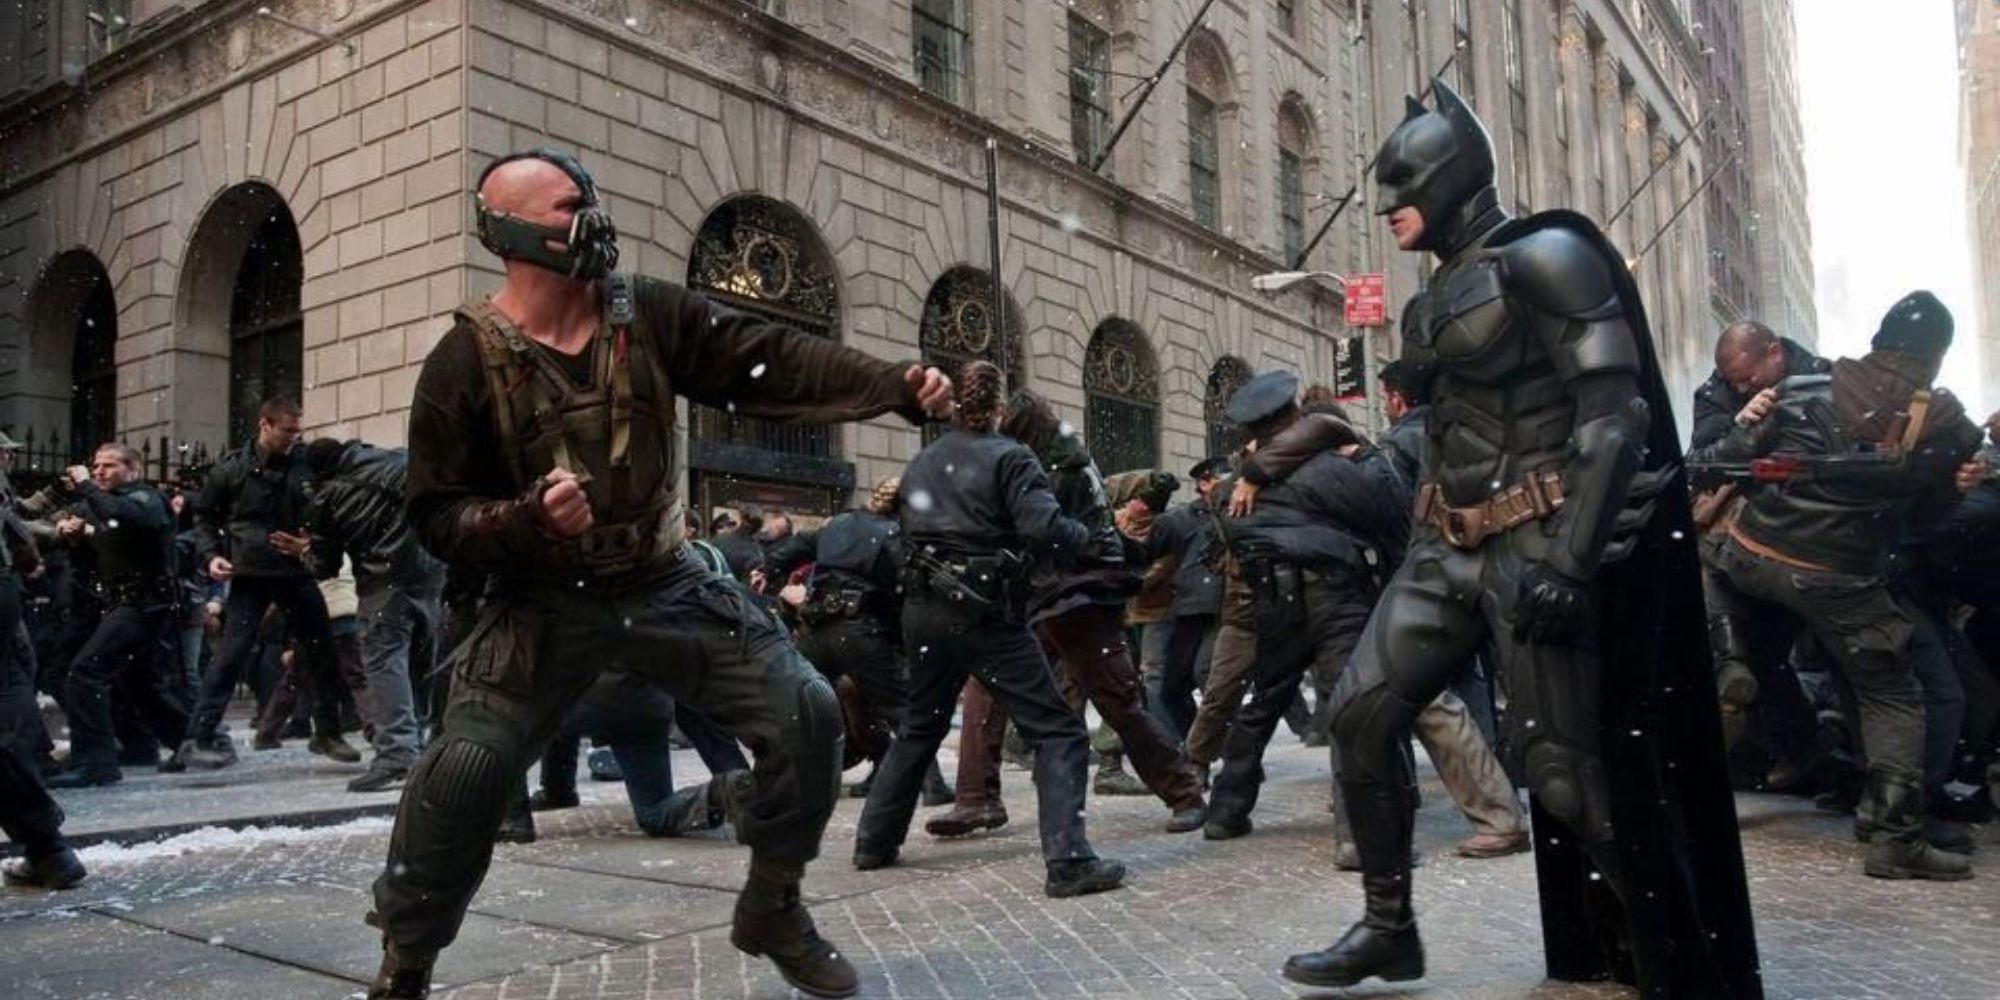 Tom Hardy (left) as Bane and Christian Bale (right) as Batman, fighting